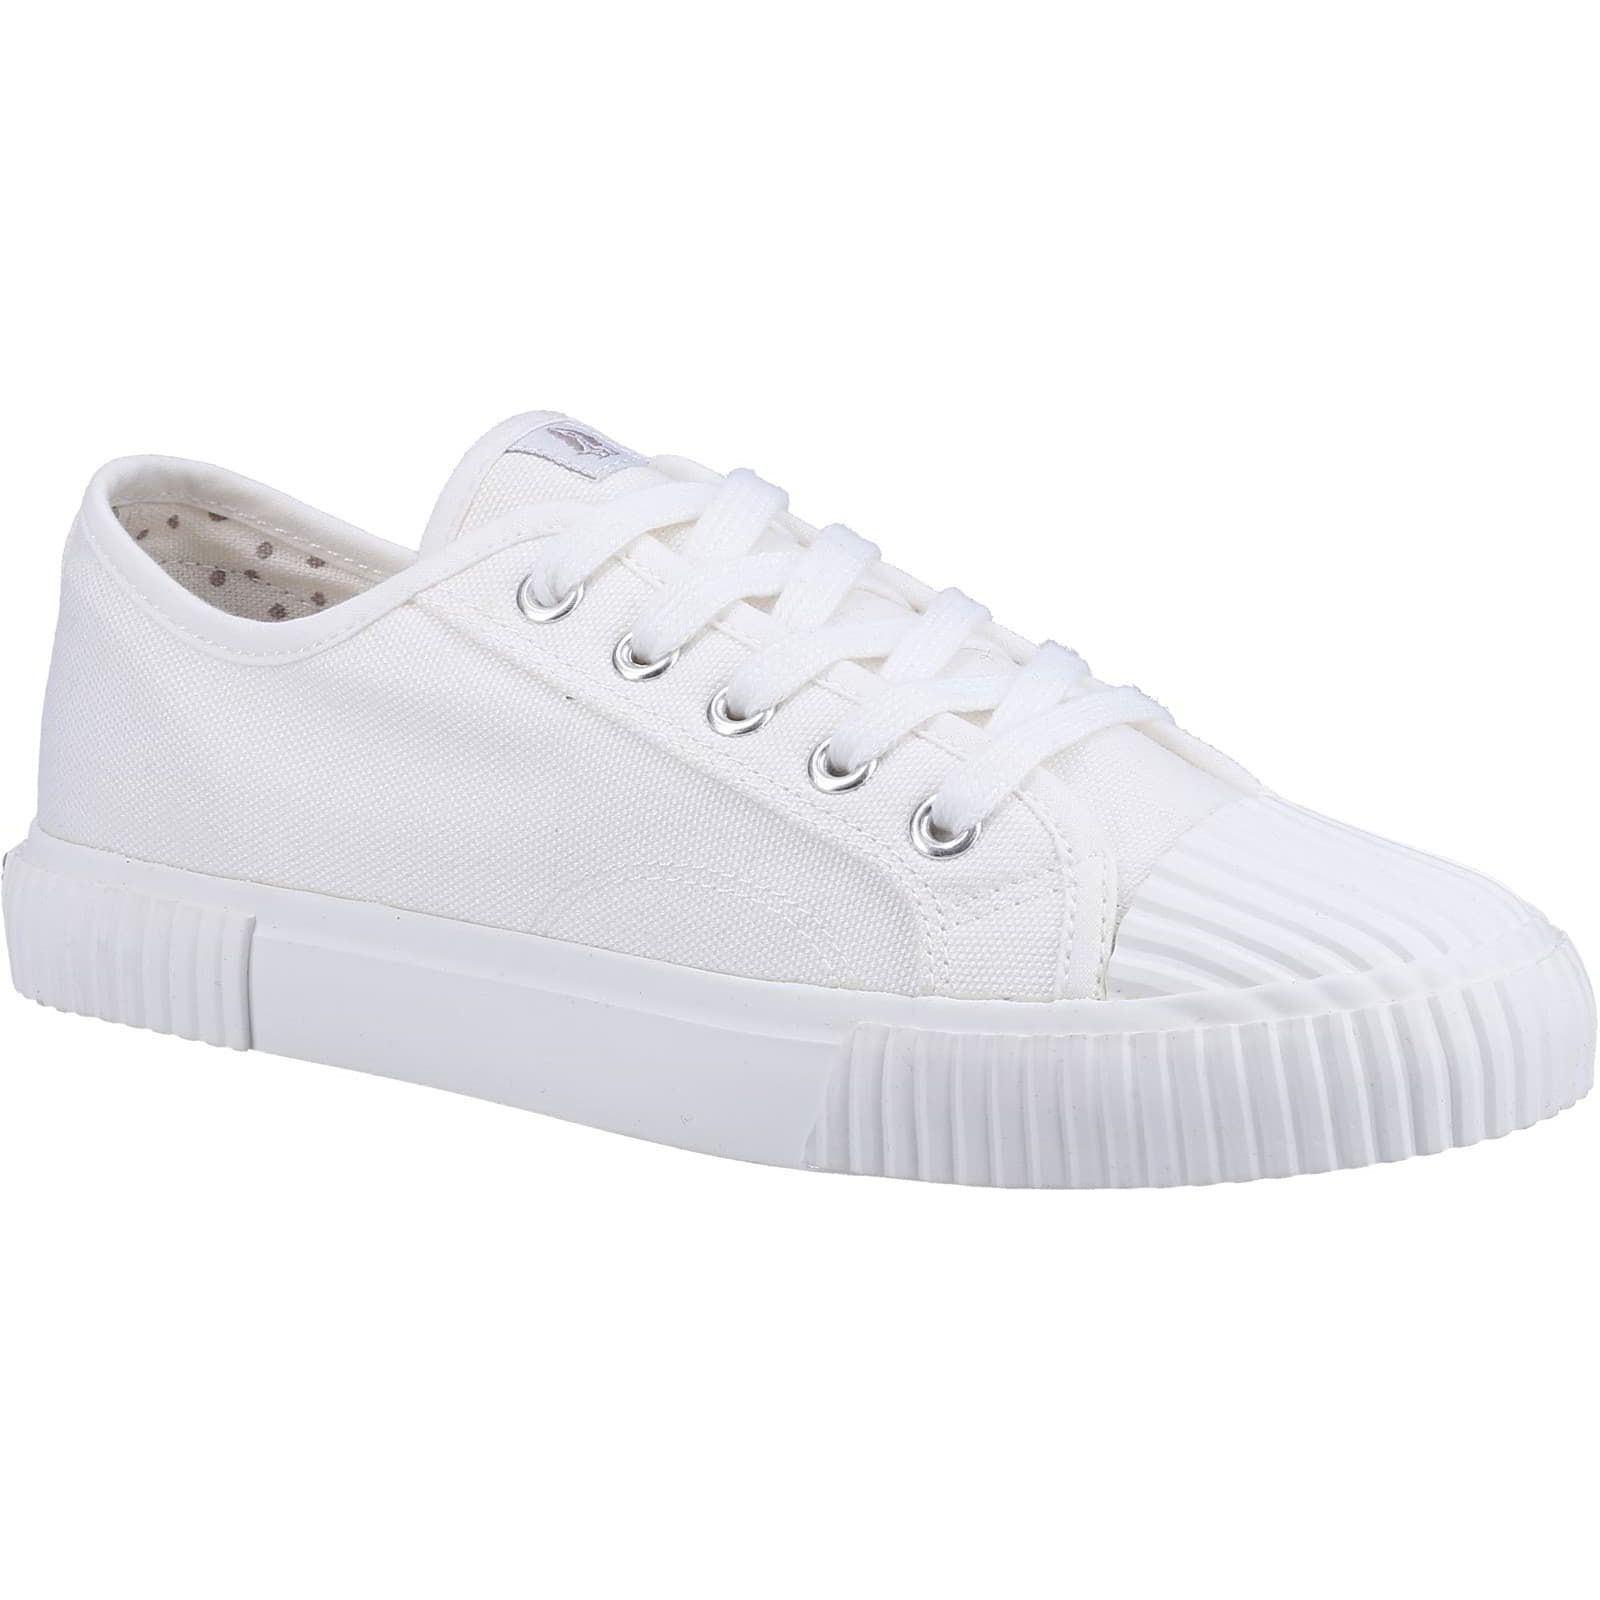 Hush Puppies Women's Brooke Lace Up Canvas Shoes Trainers - UK 5